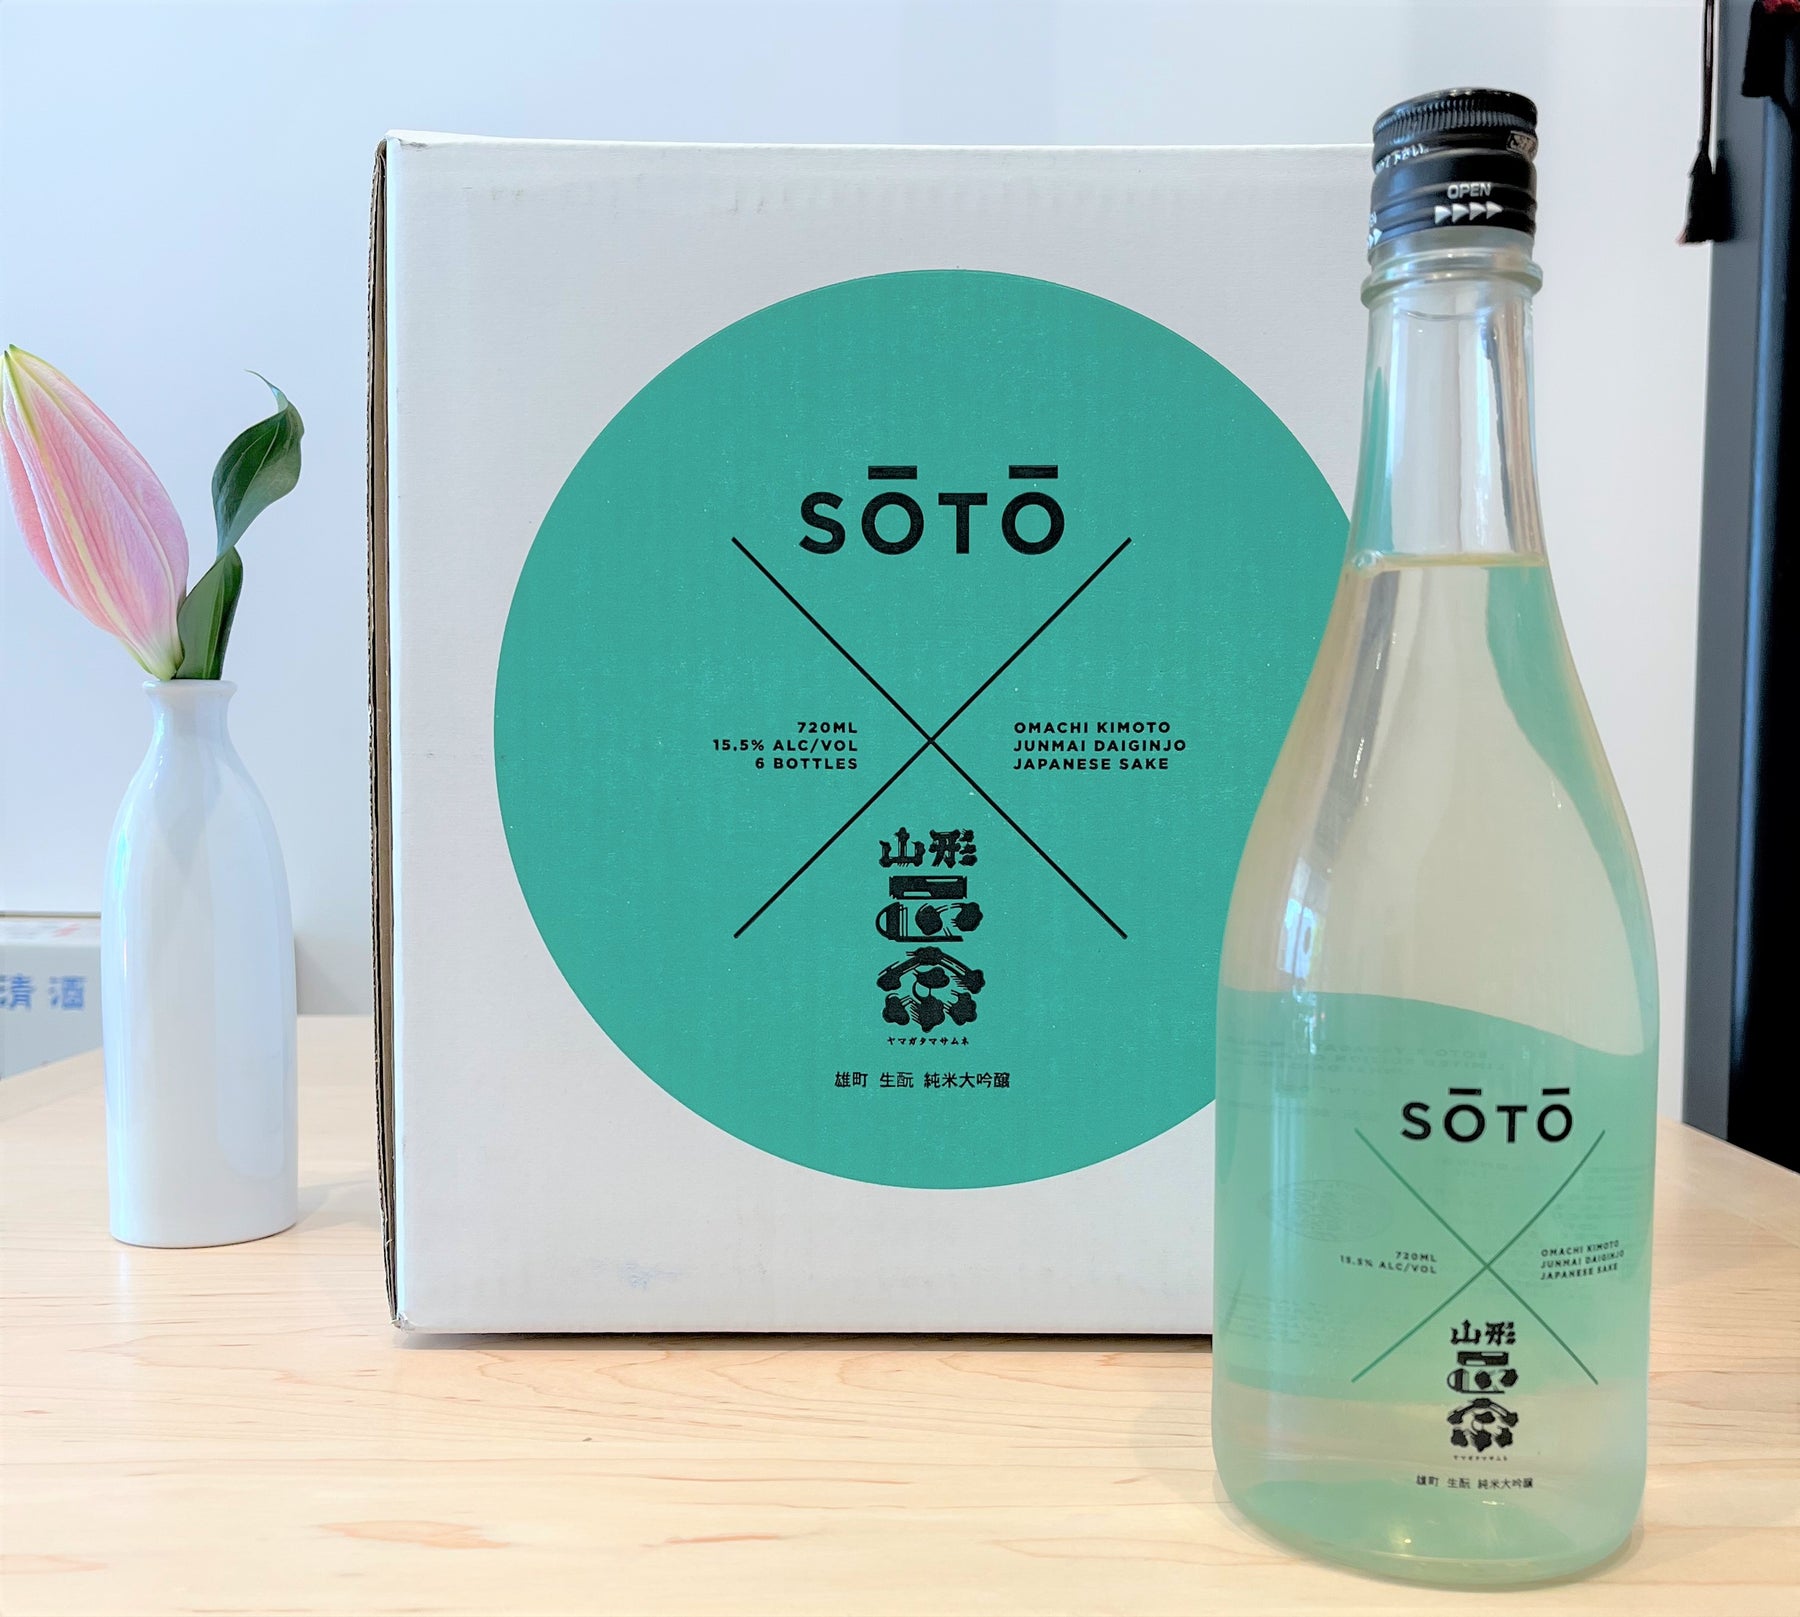 In Store Tasting – MAY 13TH SOTO Sake Pours The One of Kind Single Tank Yamagata Masamune Wonder Brew